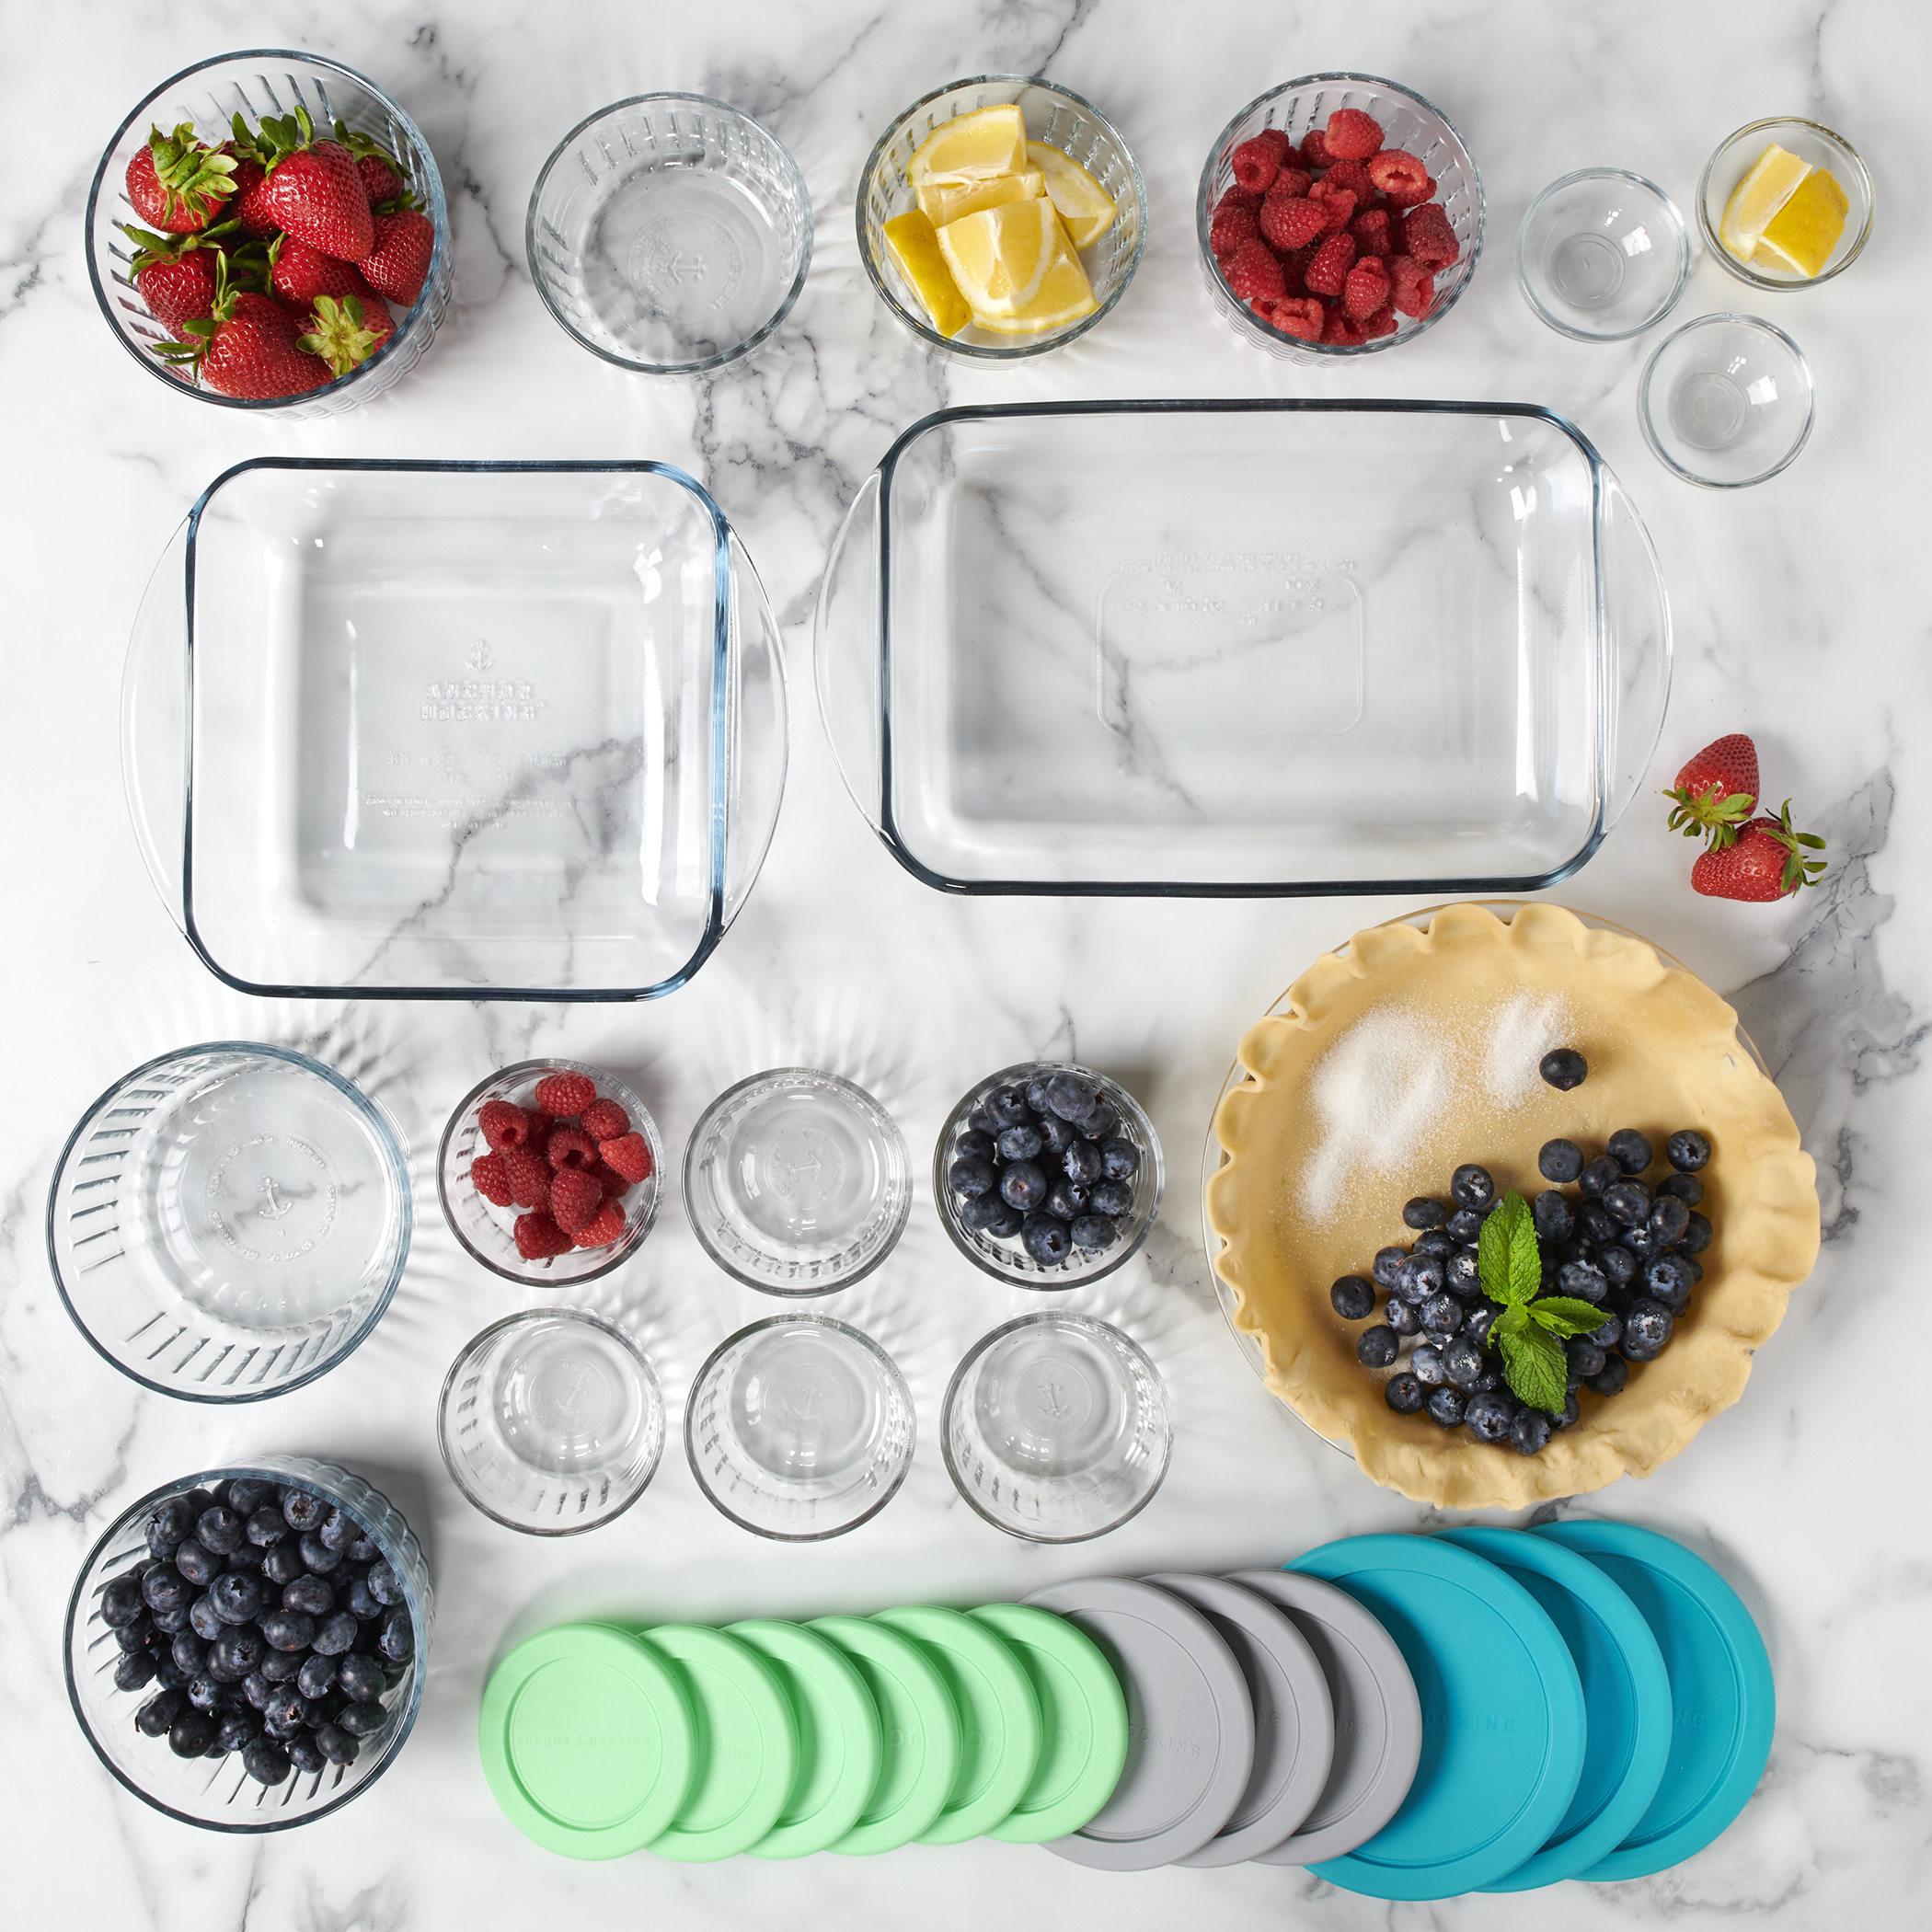 Anchor Hocking 30 Piece Glass Food Storage Containers & Glass Baking Dishes Set - image 3 of 4